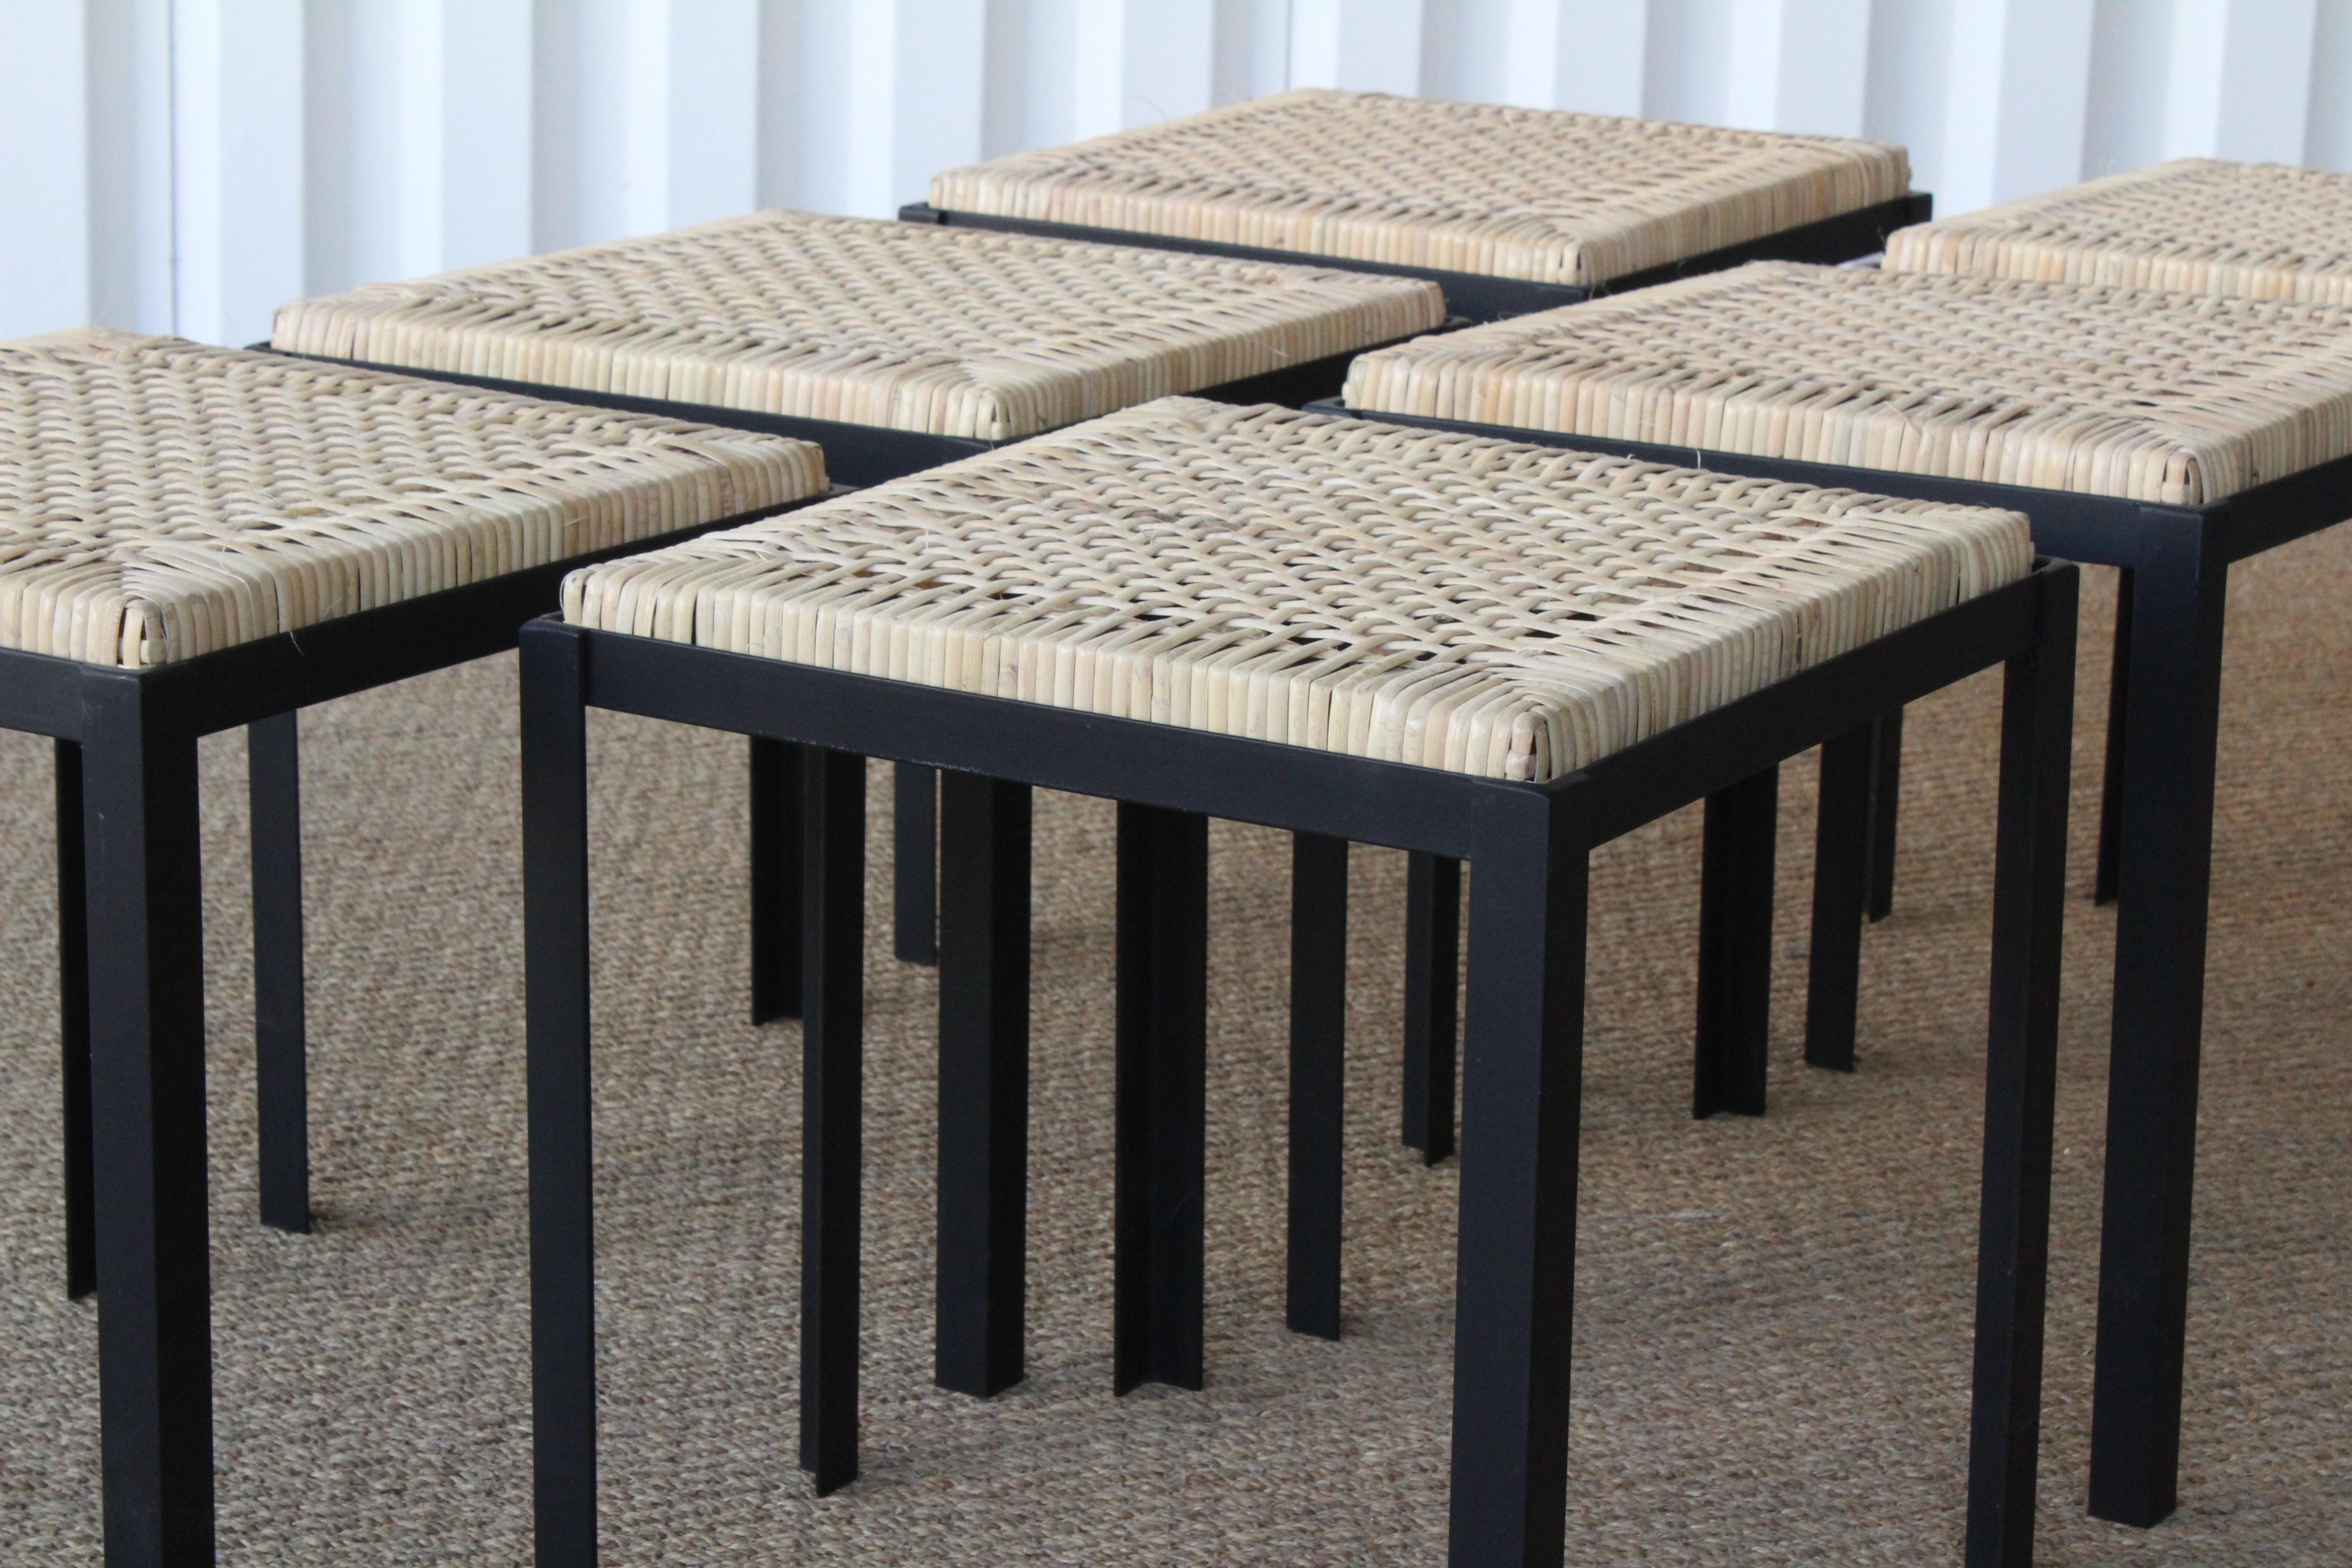 Hand woven reed and iron stools by Danny Ho Fong for Tropi-Cal, U.S.A, 1960s. Completely restored with new hand woven reed tops and newly powdercoated iron bases. Six available, sold individually.